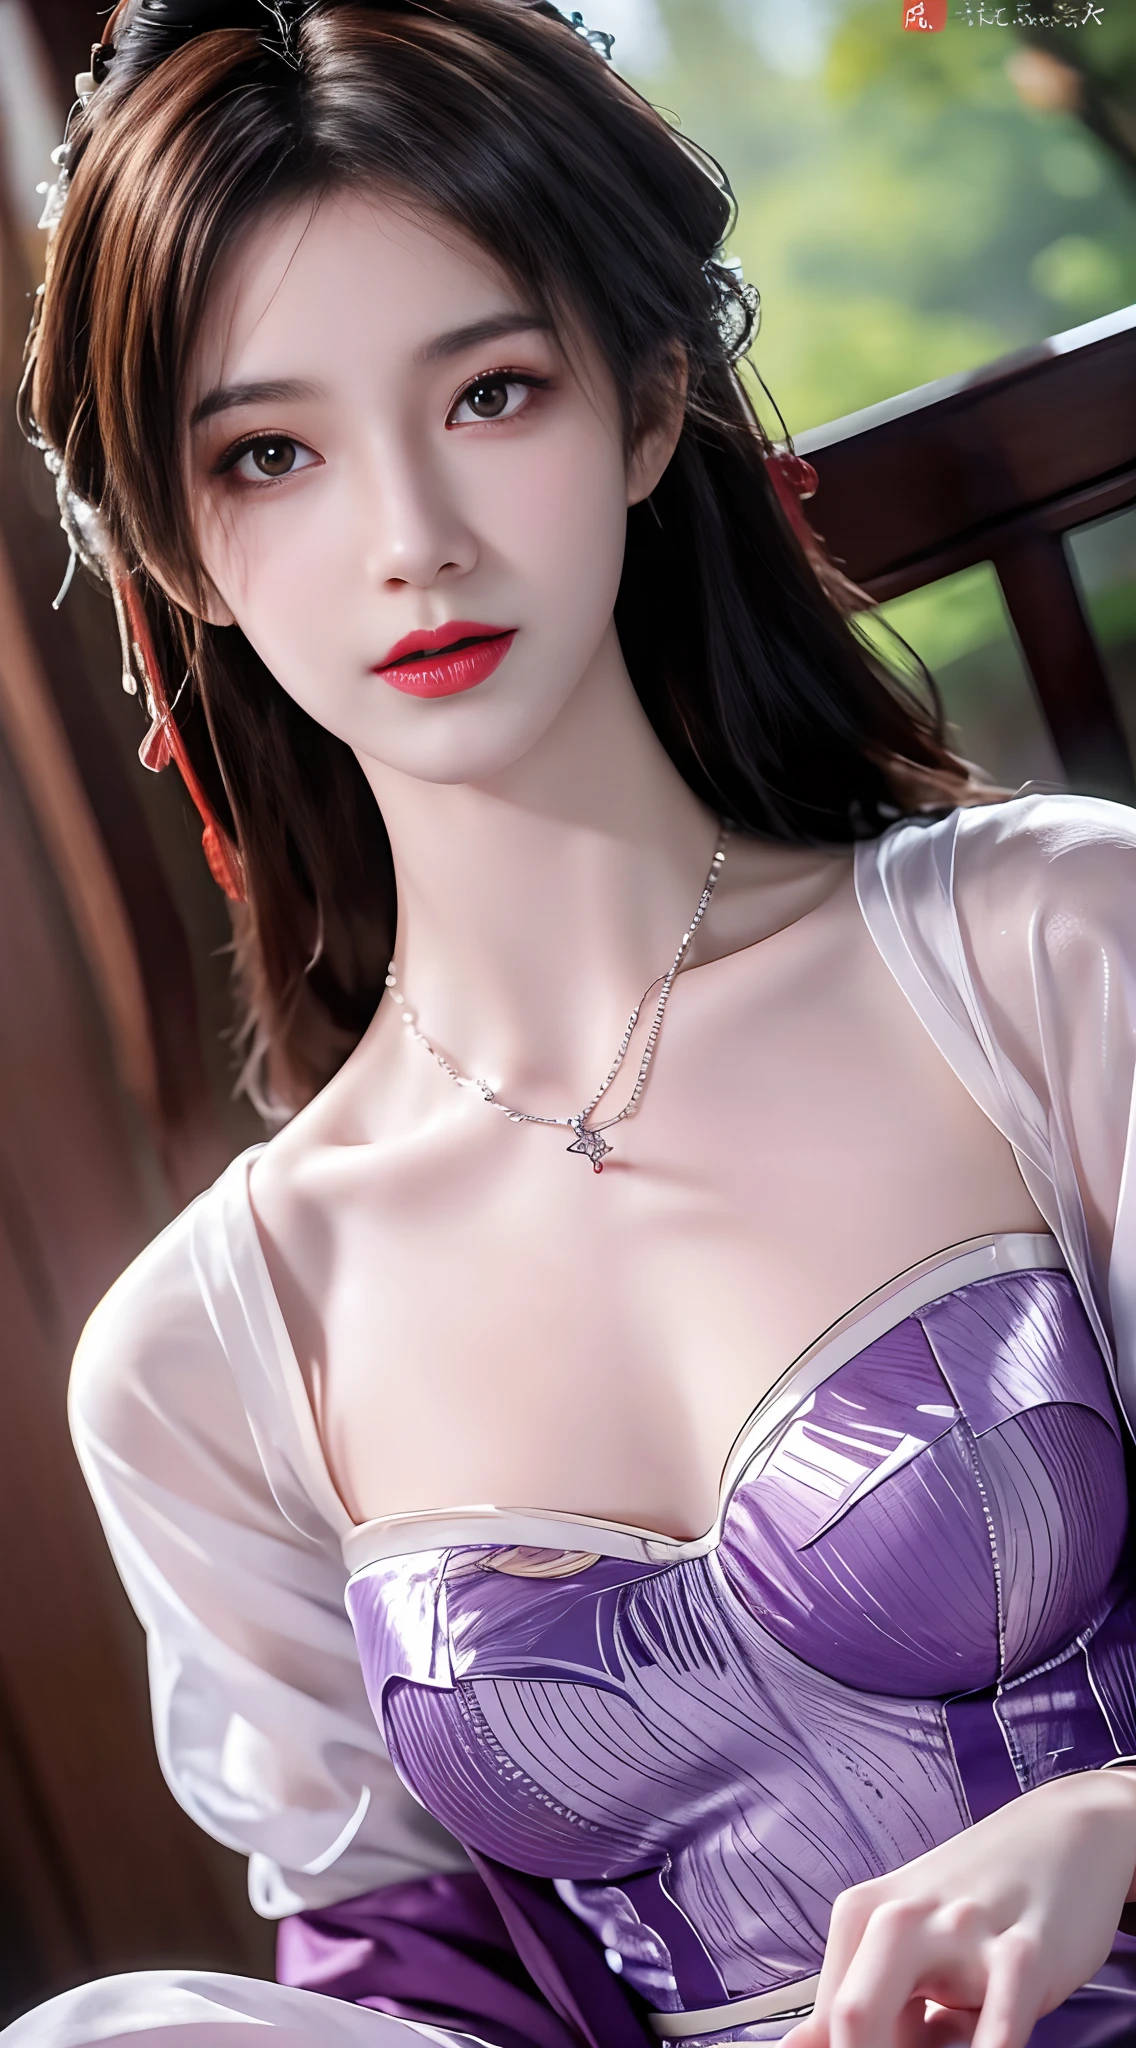 1 beautiful girl in Han costume, Thin purple silk shirt，white colors，The texture is diverse, white lace top, long platinum purple ponytail, hair adornments, ear jewelry, light purple rabbit ears, necklace and necklace, meticulously drawn large purple eyes, meticulous makeup, Thin eyebrows, High nose, lovely red lips, Without smiling, pursed lips, rosycheeks, Wide breasts, Big breasts , well-proportioned bust, Slim waist, purple mesh socks, chinese hanfu style, fictitious art textures, vivid and realistic colors, RAW photos, Realistic photos, ultra high quality 8k surreal photos, (effective fantasy light effect: 1.8), 10x pixel, Magic effects (Background): 1.8), Super detailed eyes, girl body portrait, Solo girl, ancient hanfu background,